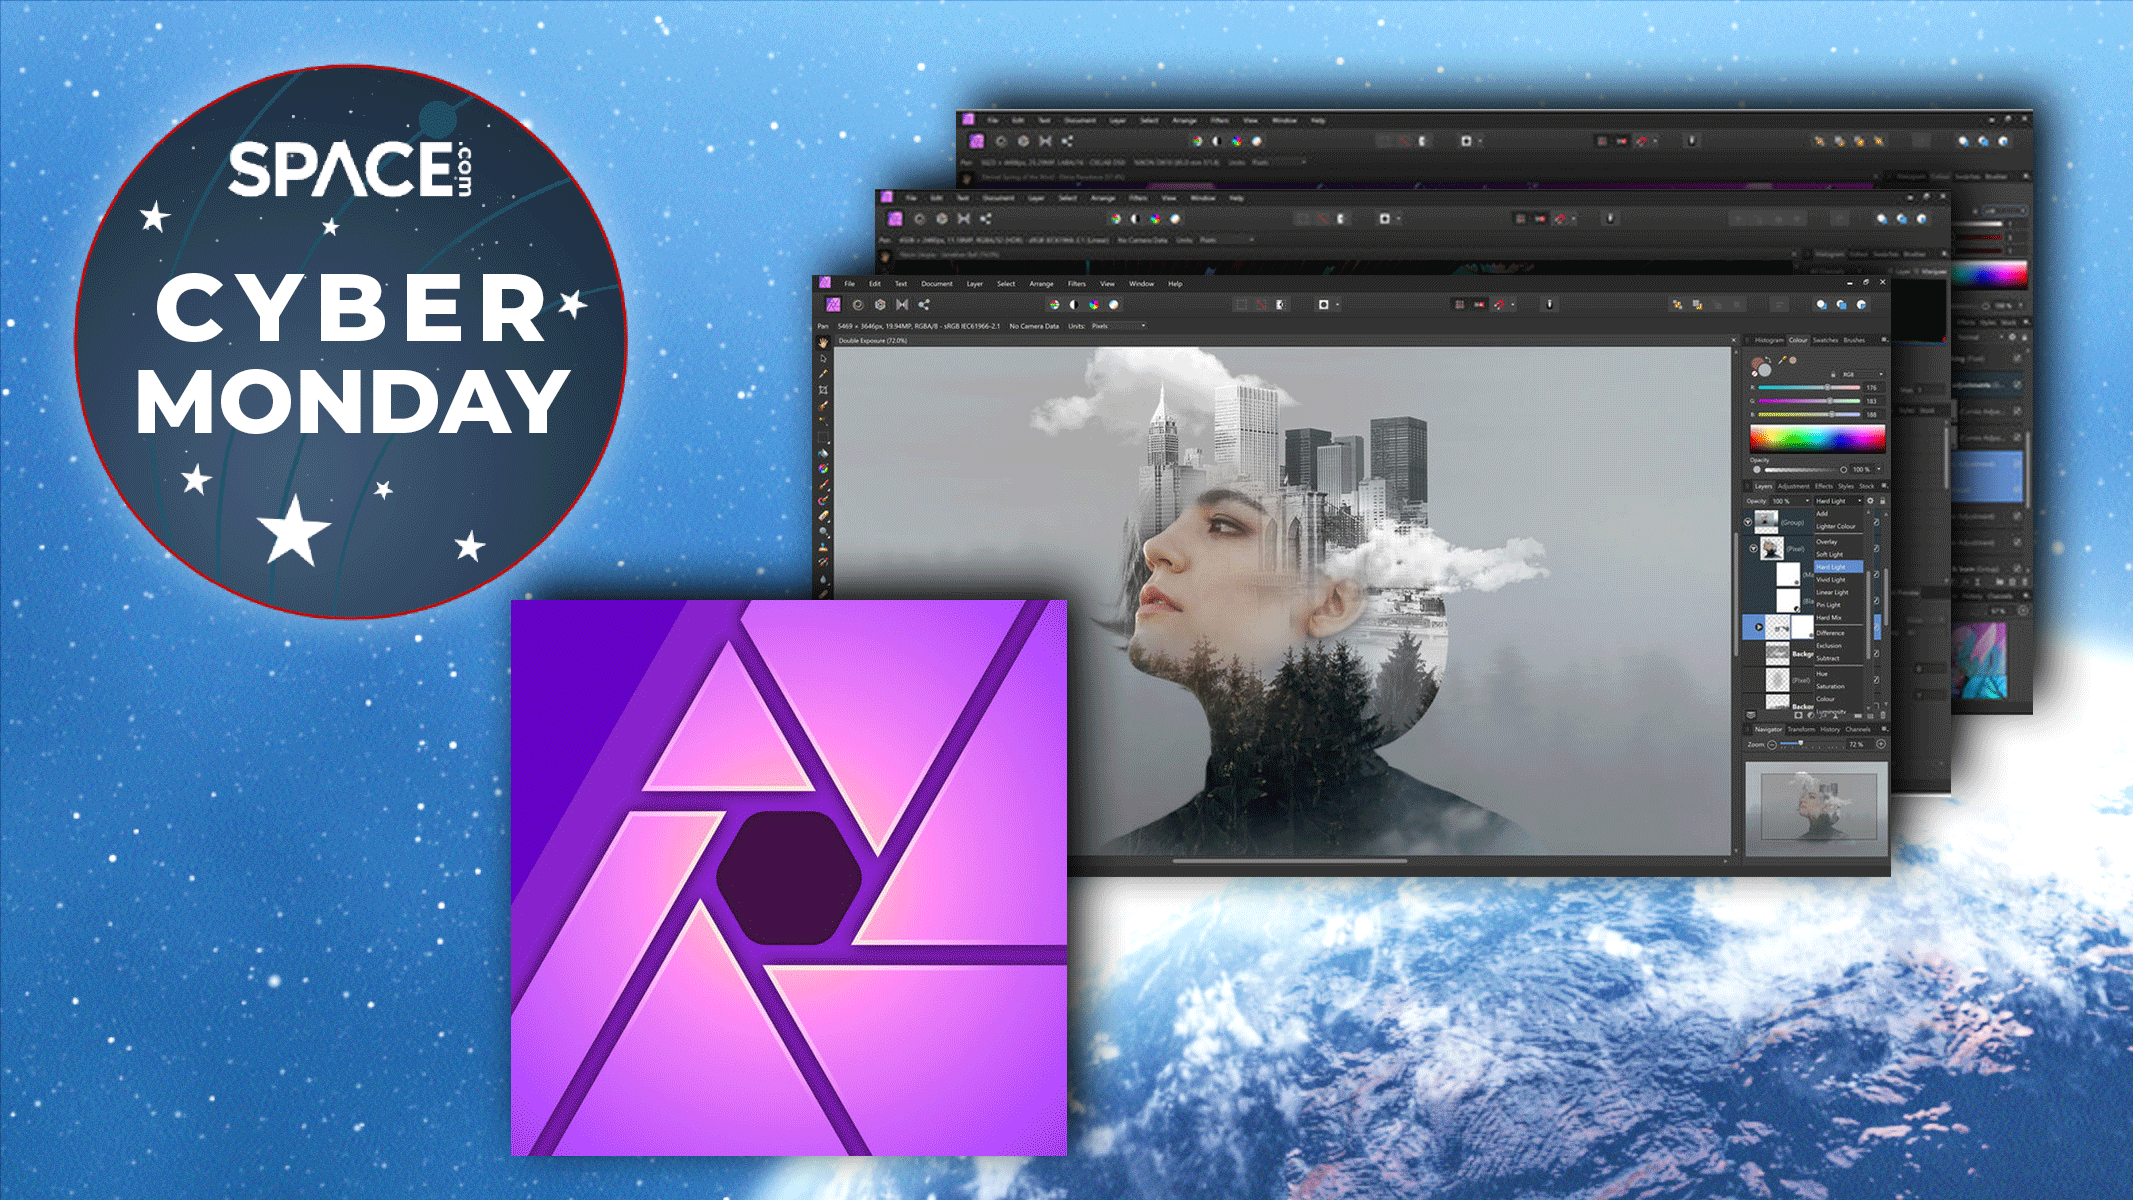 Charotar Globe Daily Affinity photo screenshots against an image of the earth with stars and a cyber monday badge